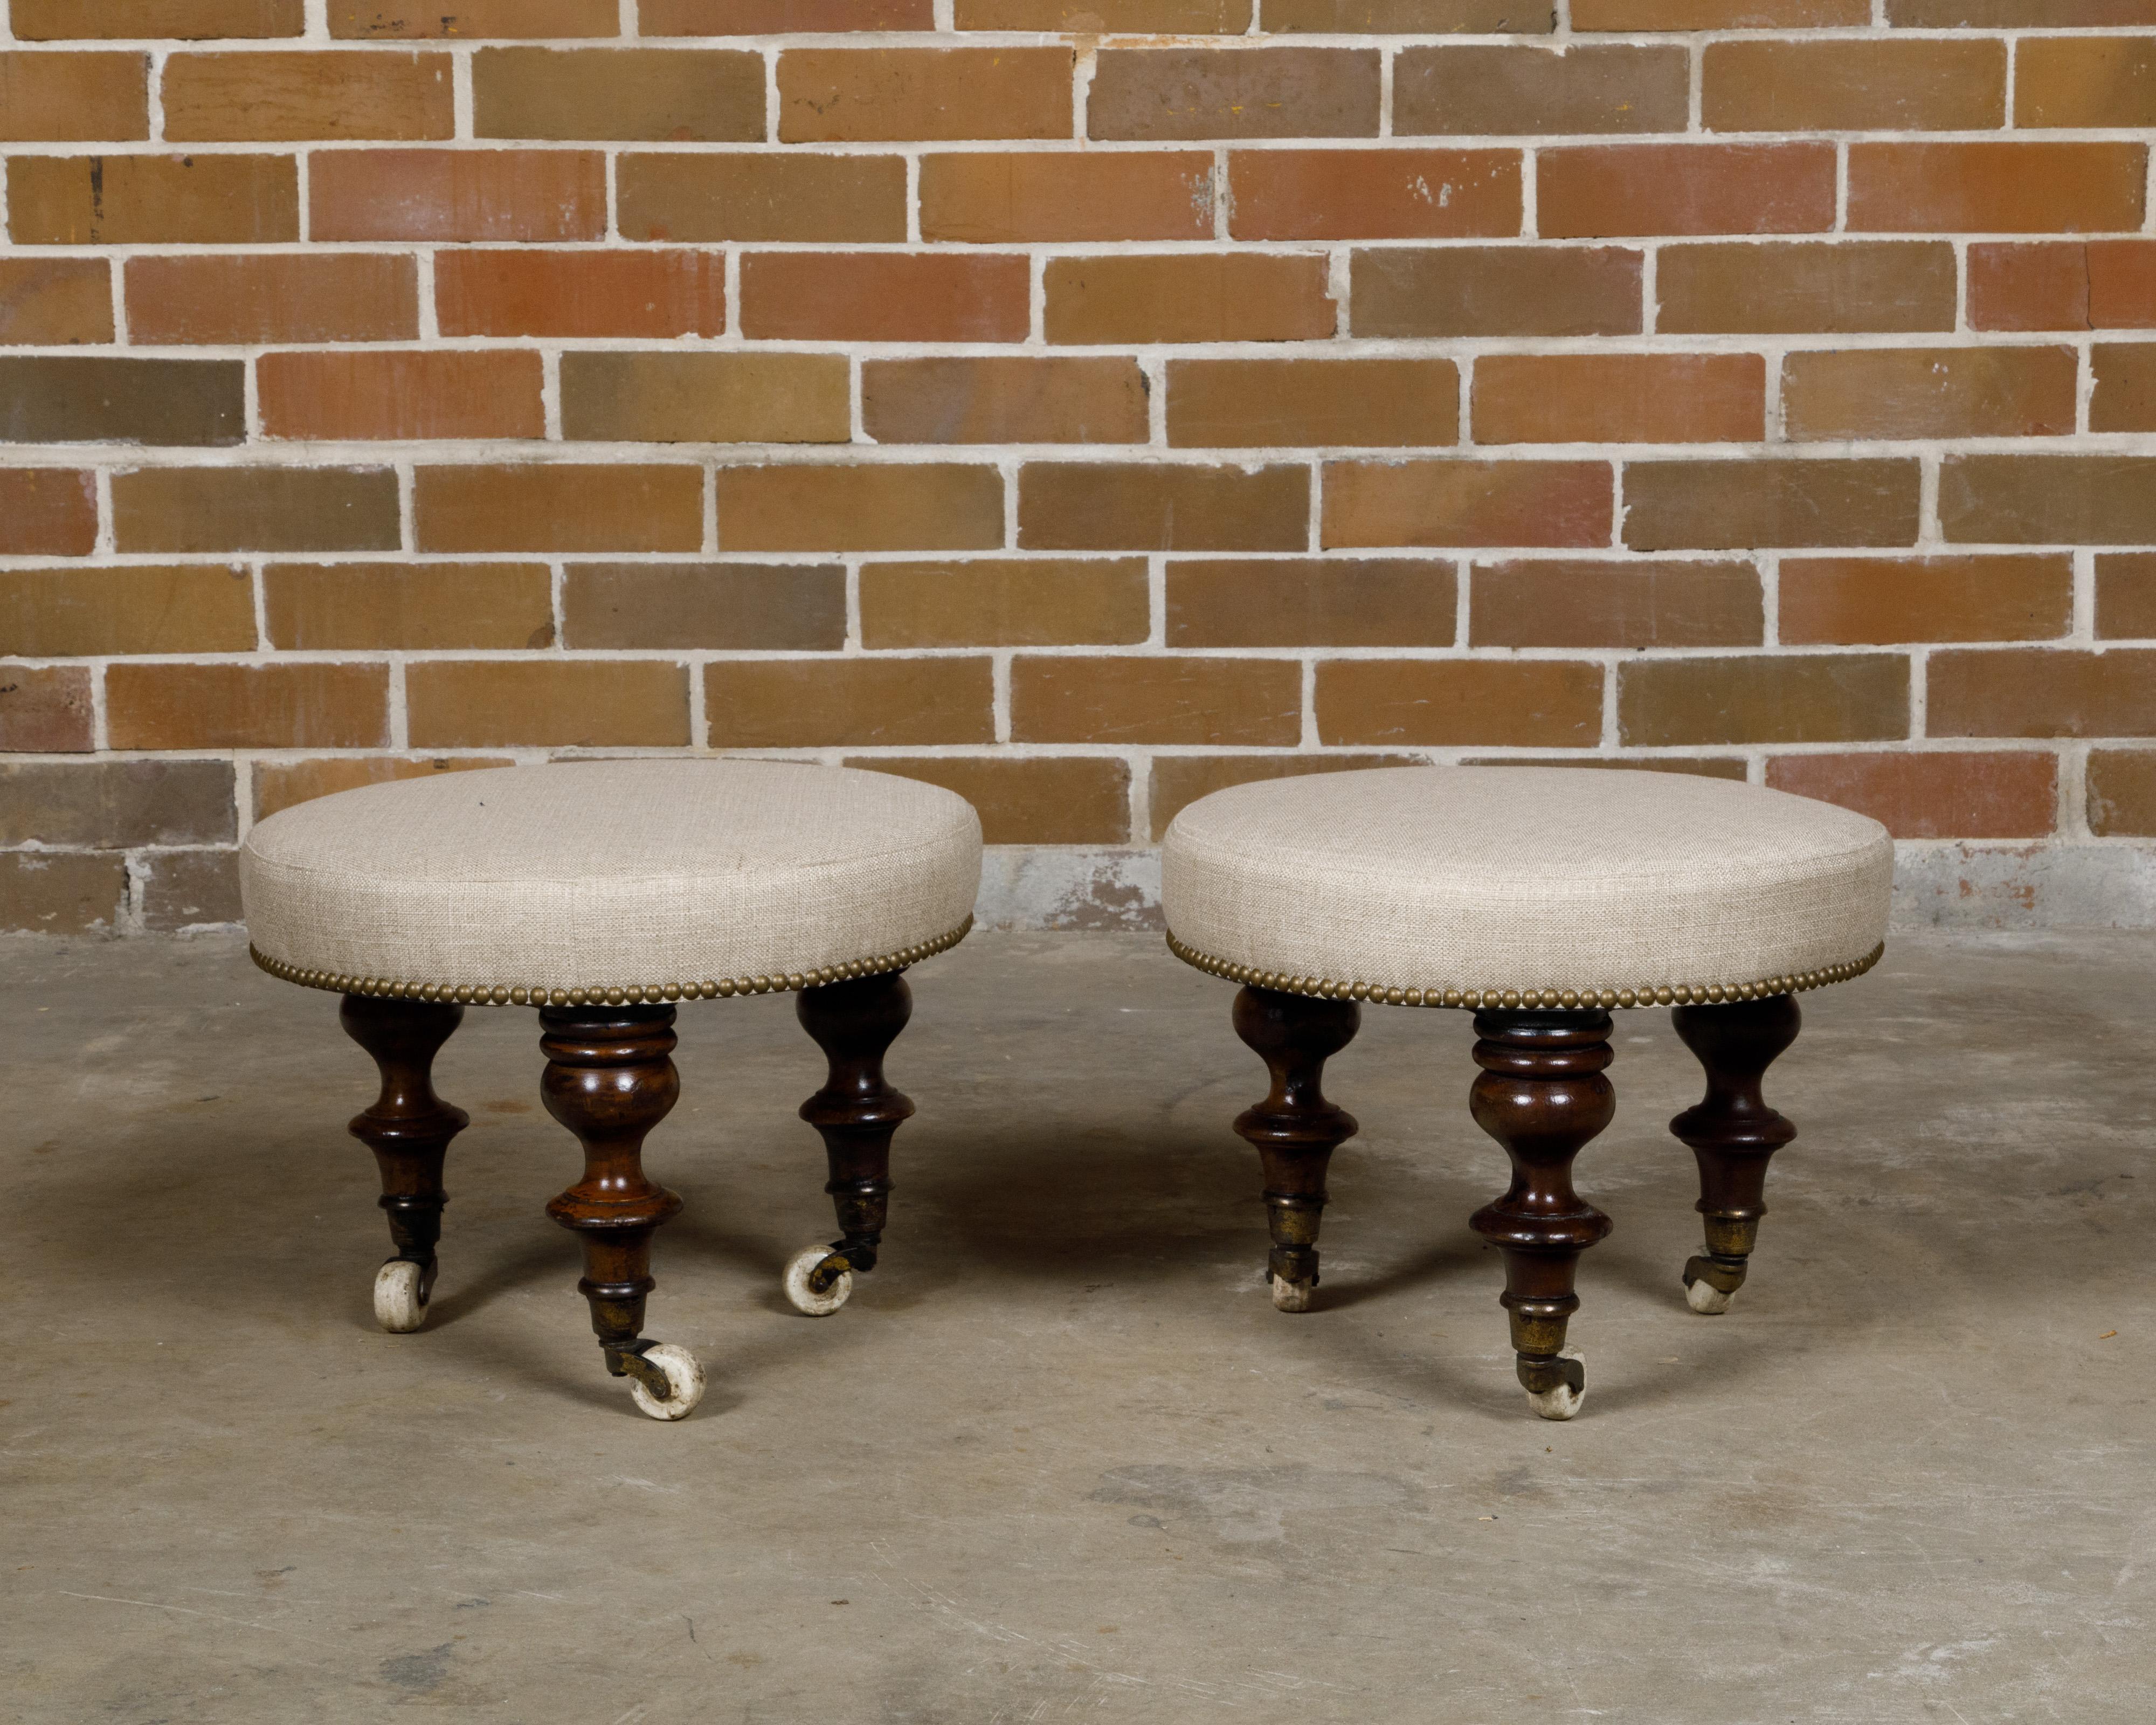 English Mahogany Stools with 19th Century Turned Legs on Casters, a Pair For Sale 1